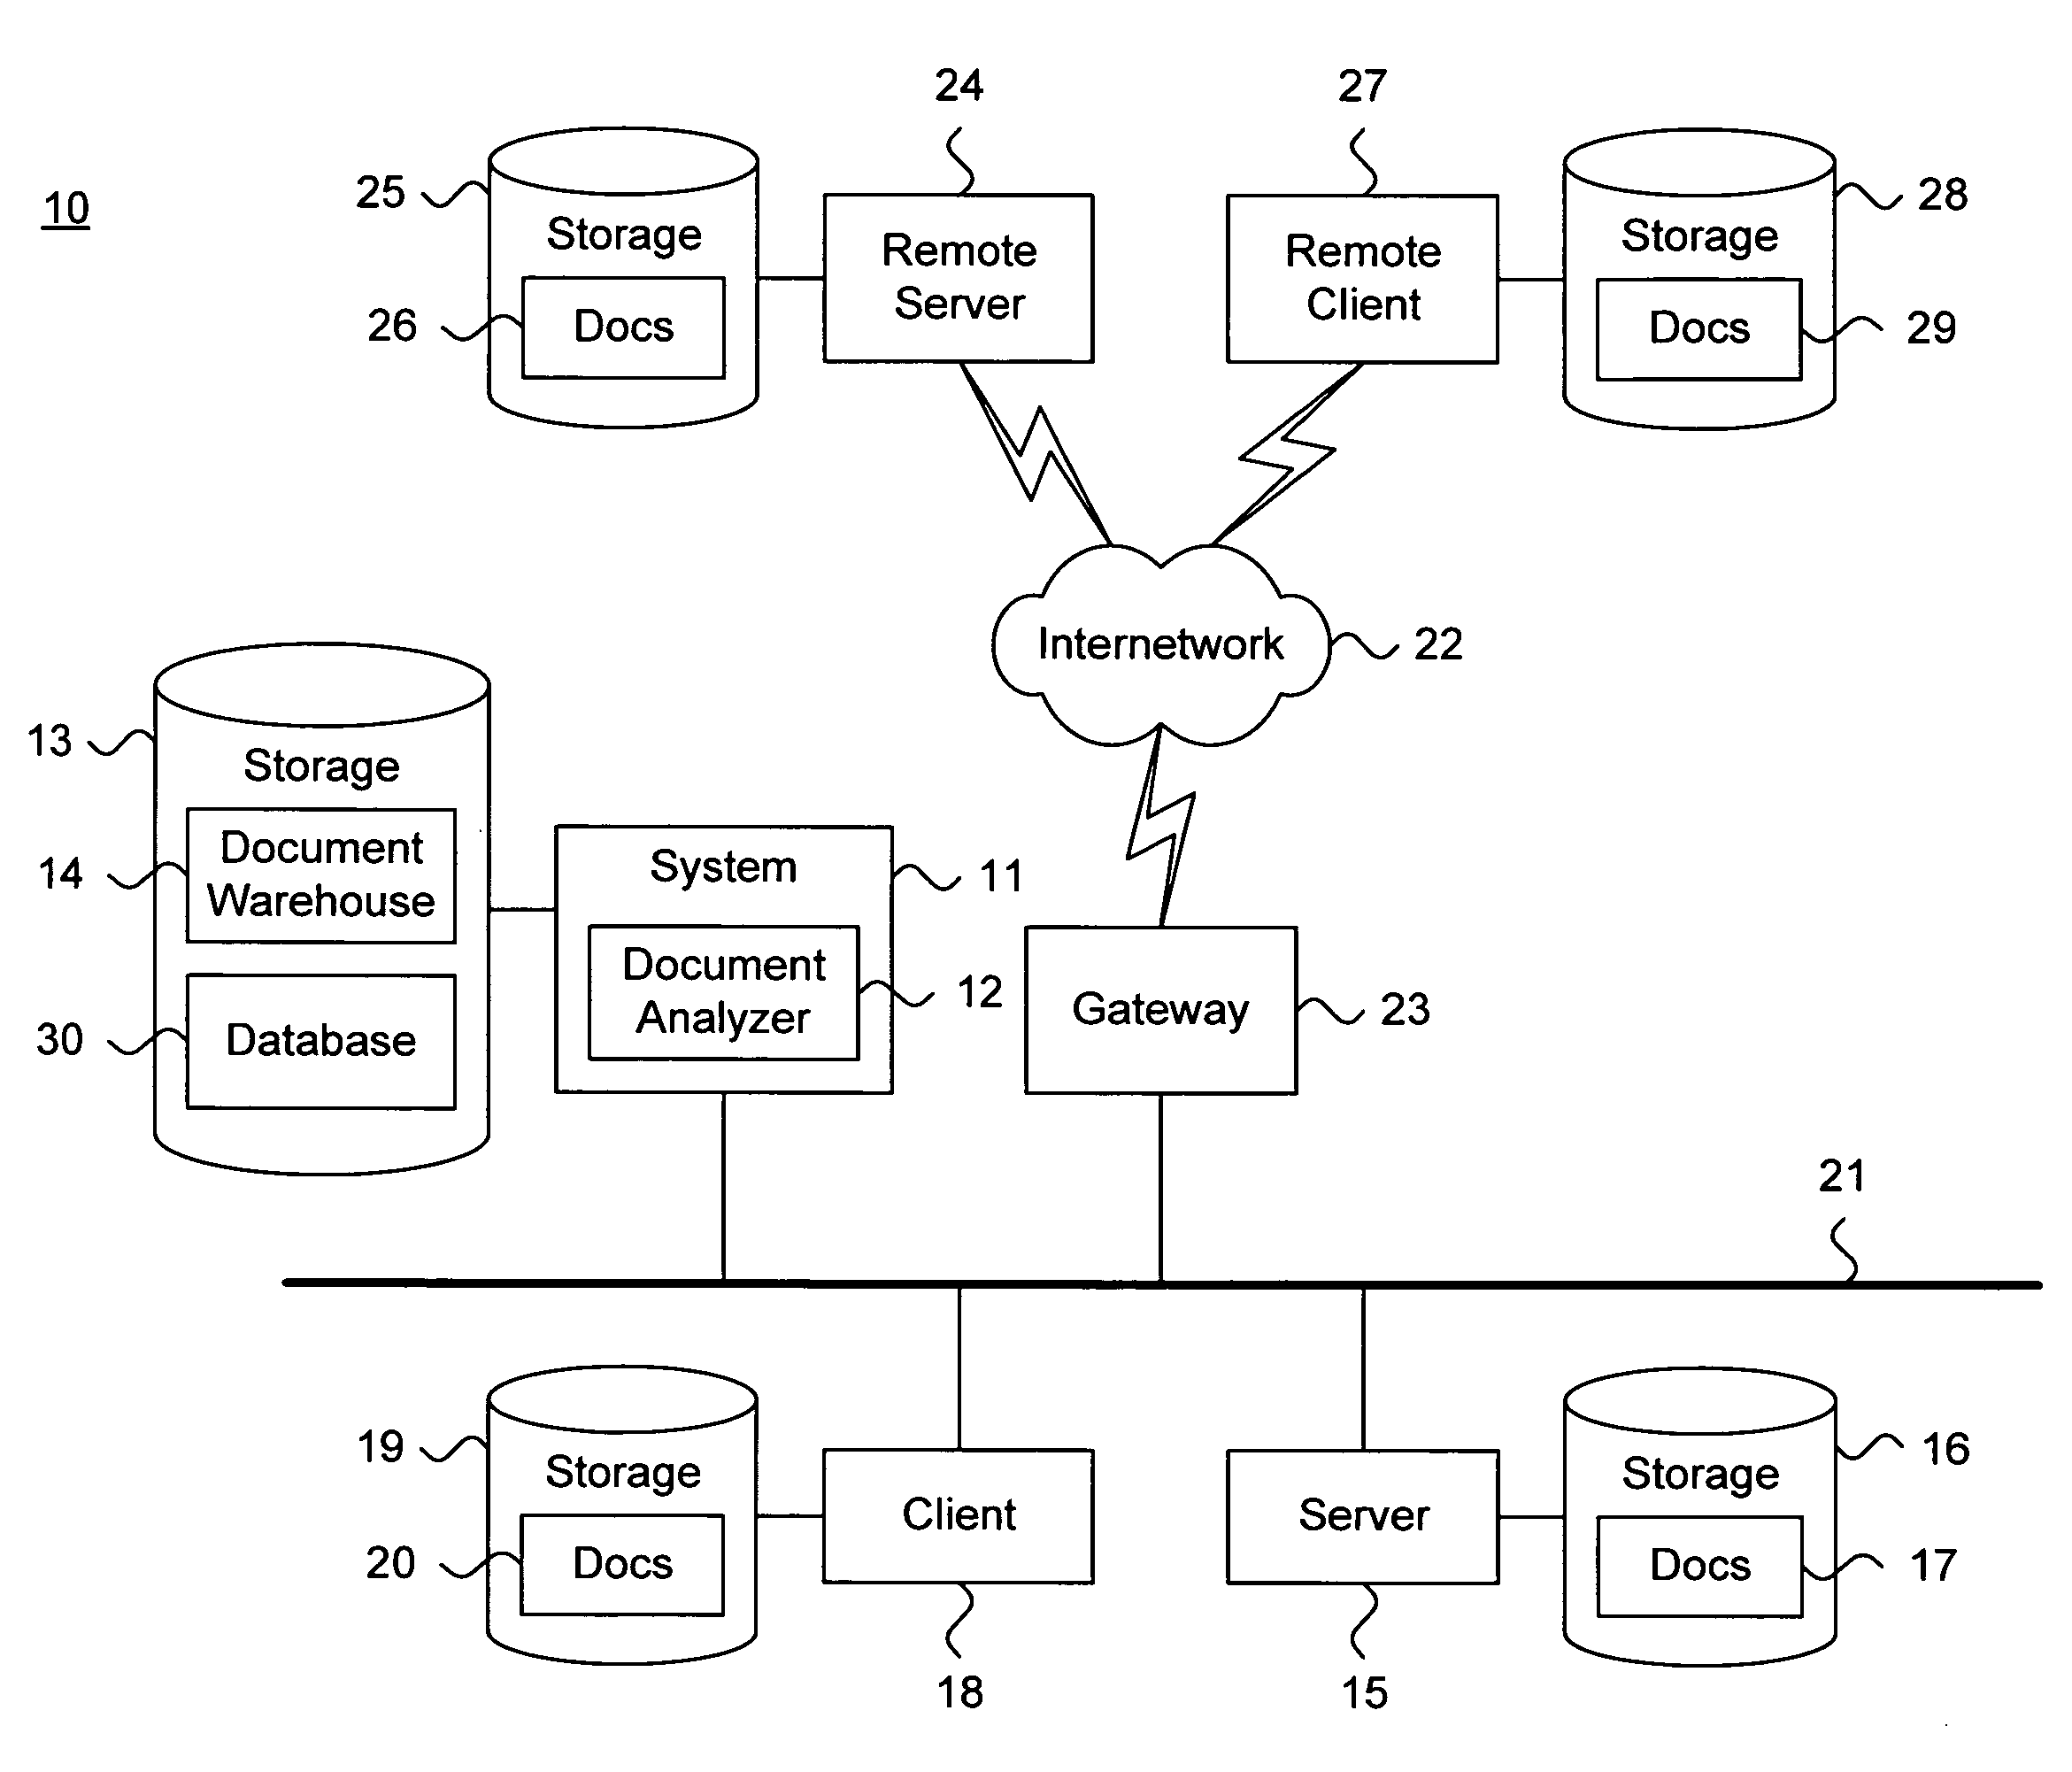 System and method for efficiently generating cluster groupings in a multi-dimensional concept space